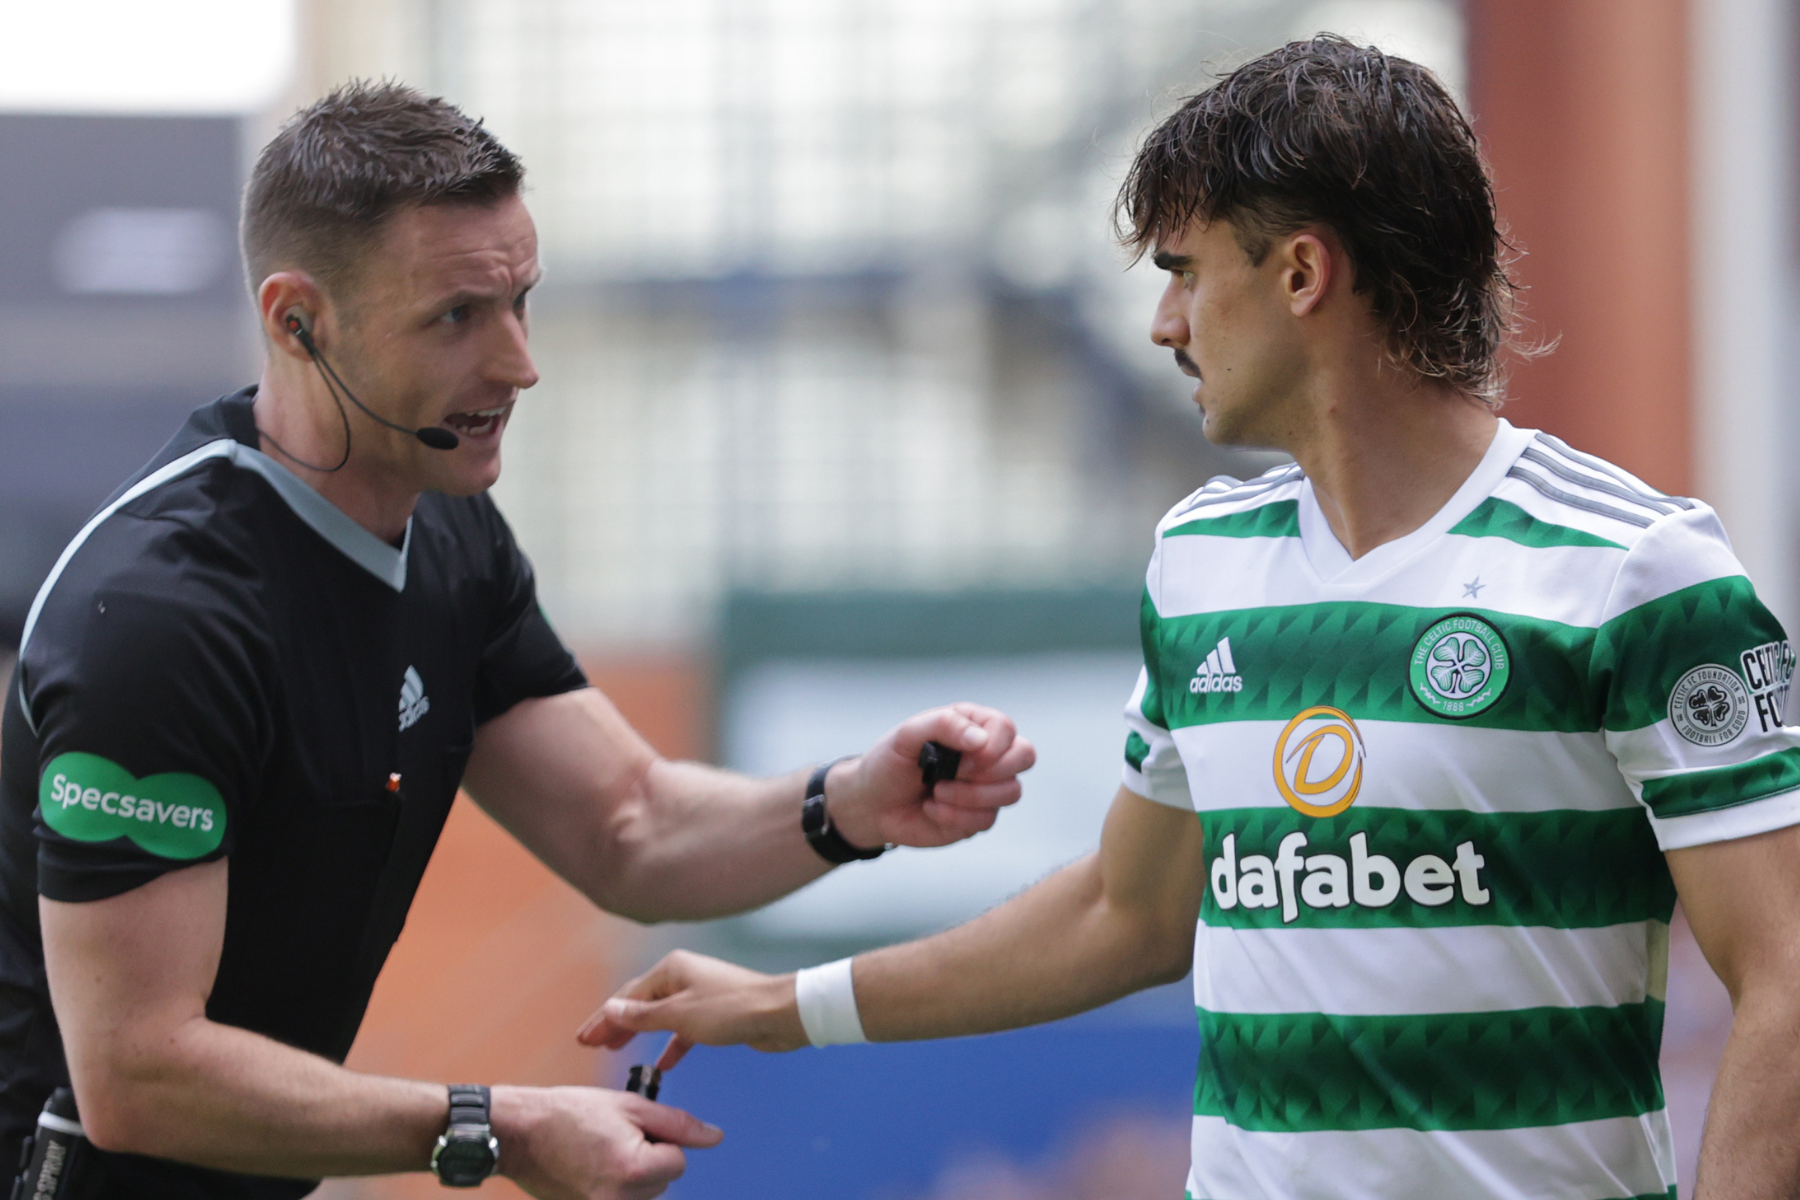 Jota hit by objects from Rangers stands in Celtic clash